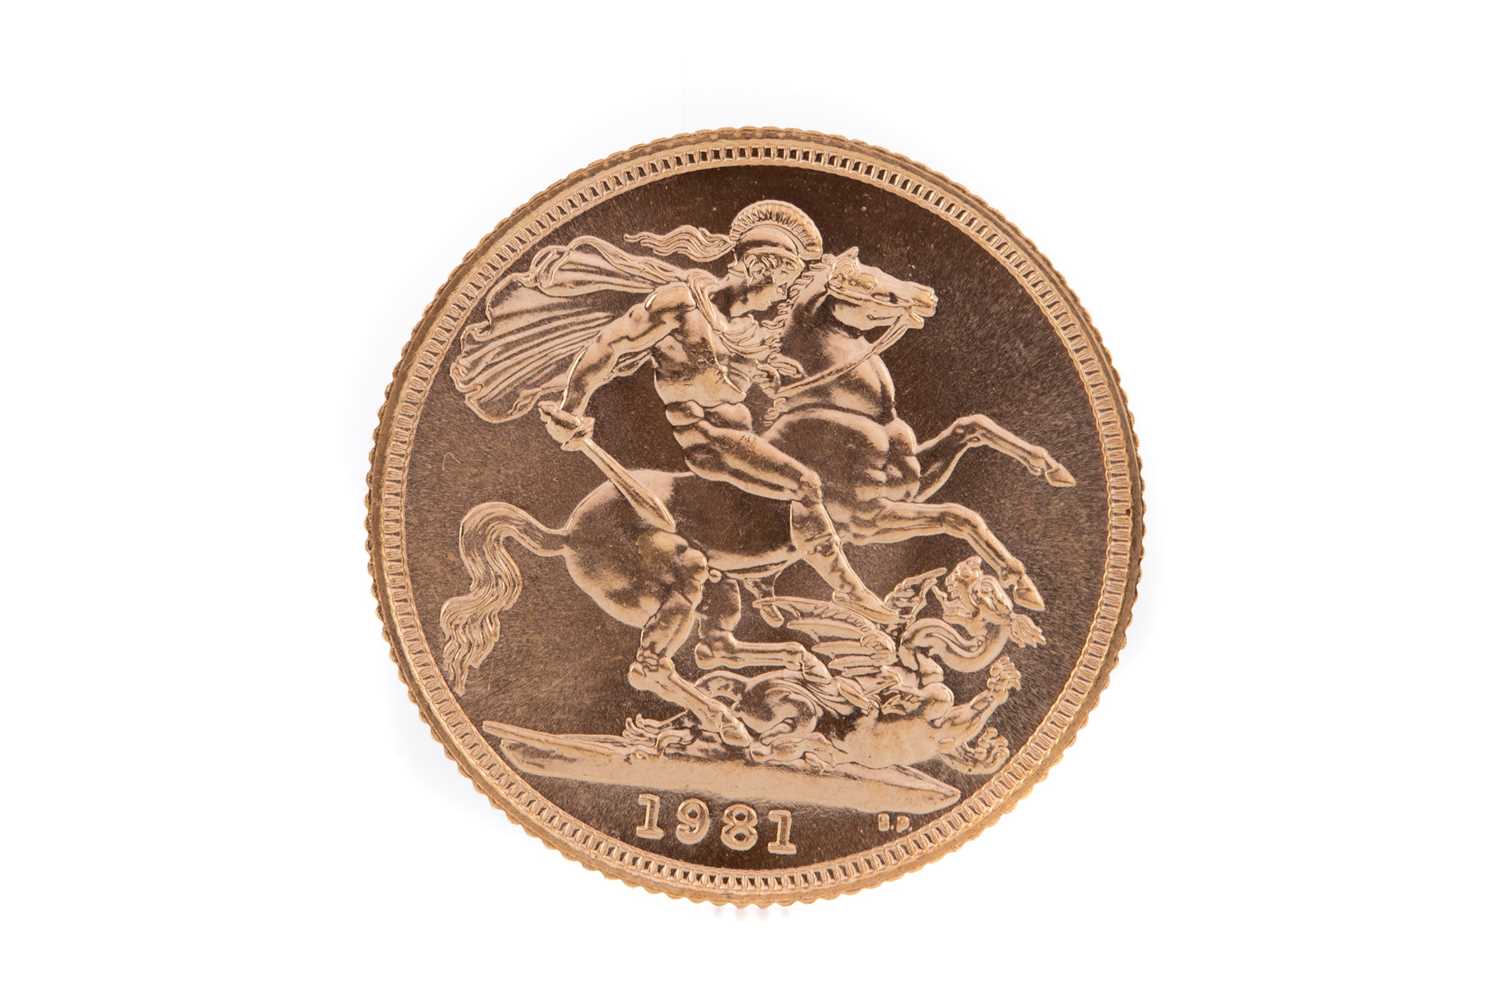 Lot 102 - AN ELIZABETH II GOLD SOVEREIGN DATED 1981